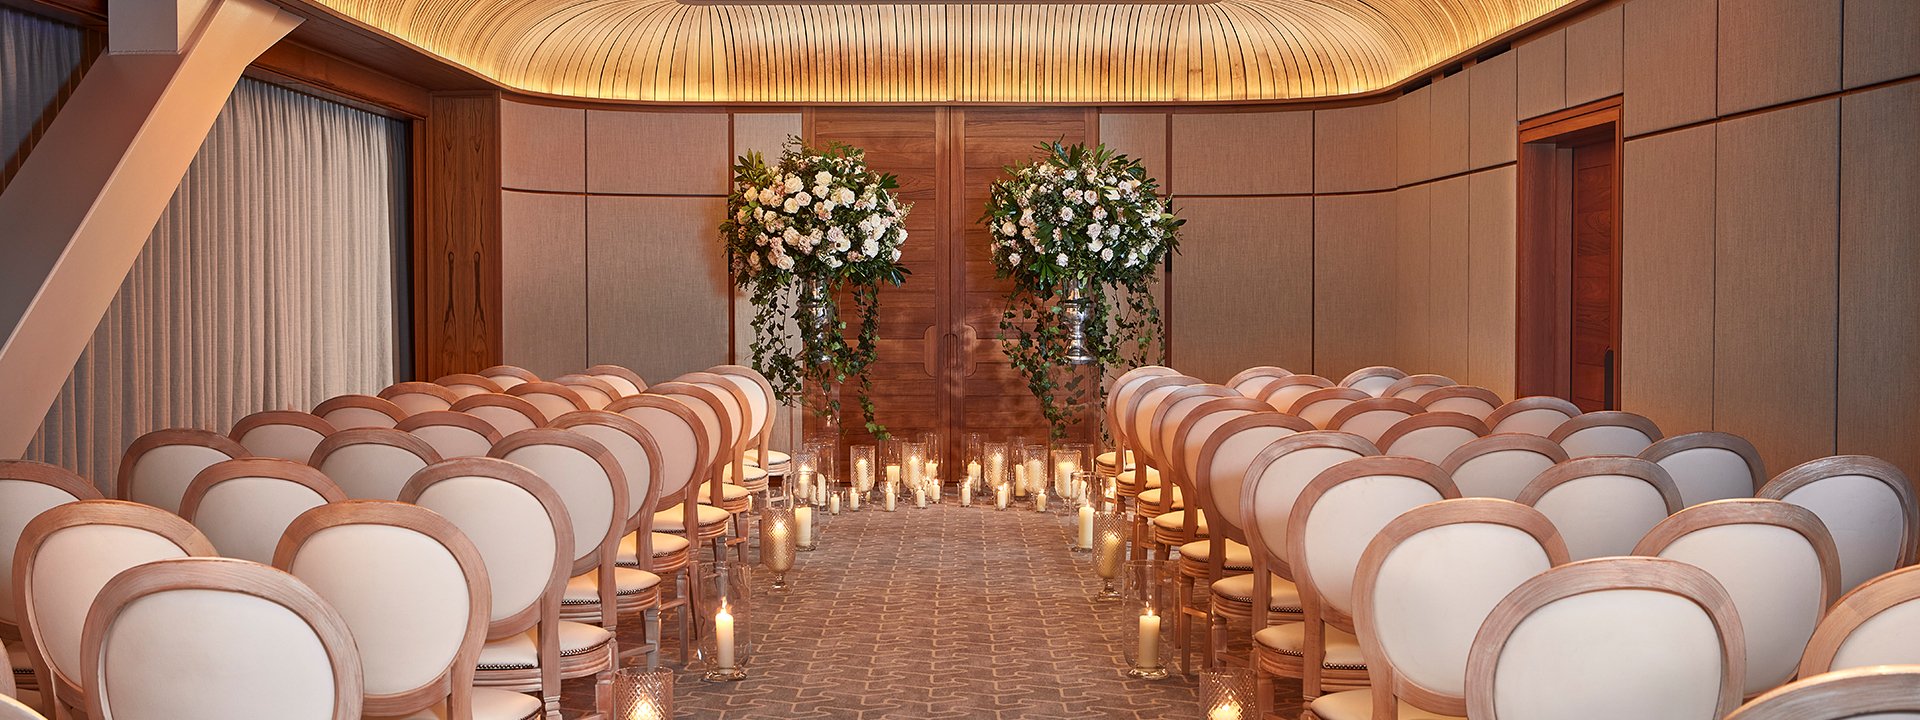 Knightsbridge room set up as a private event with chairs set up with an alley and an arch.